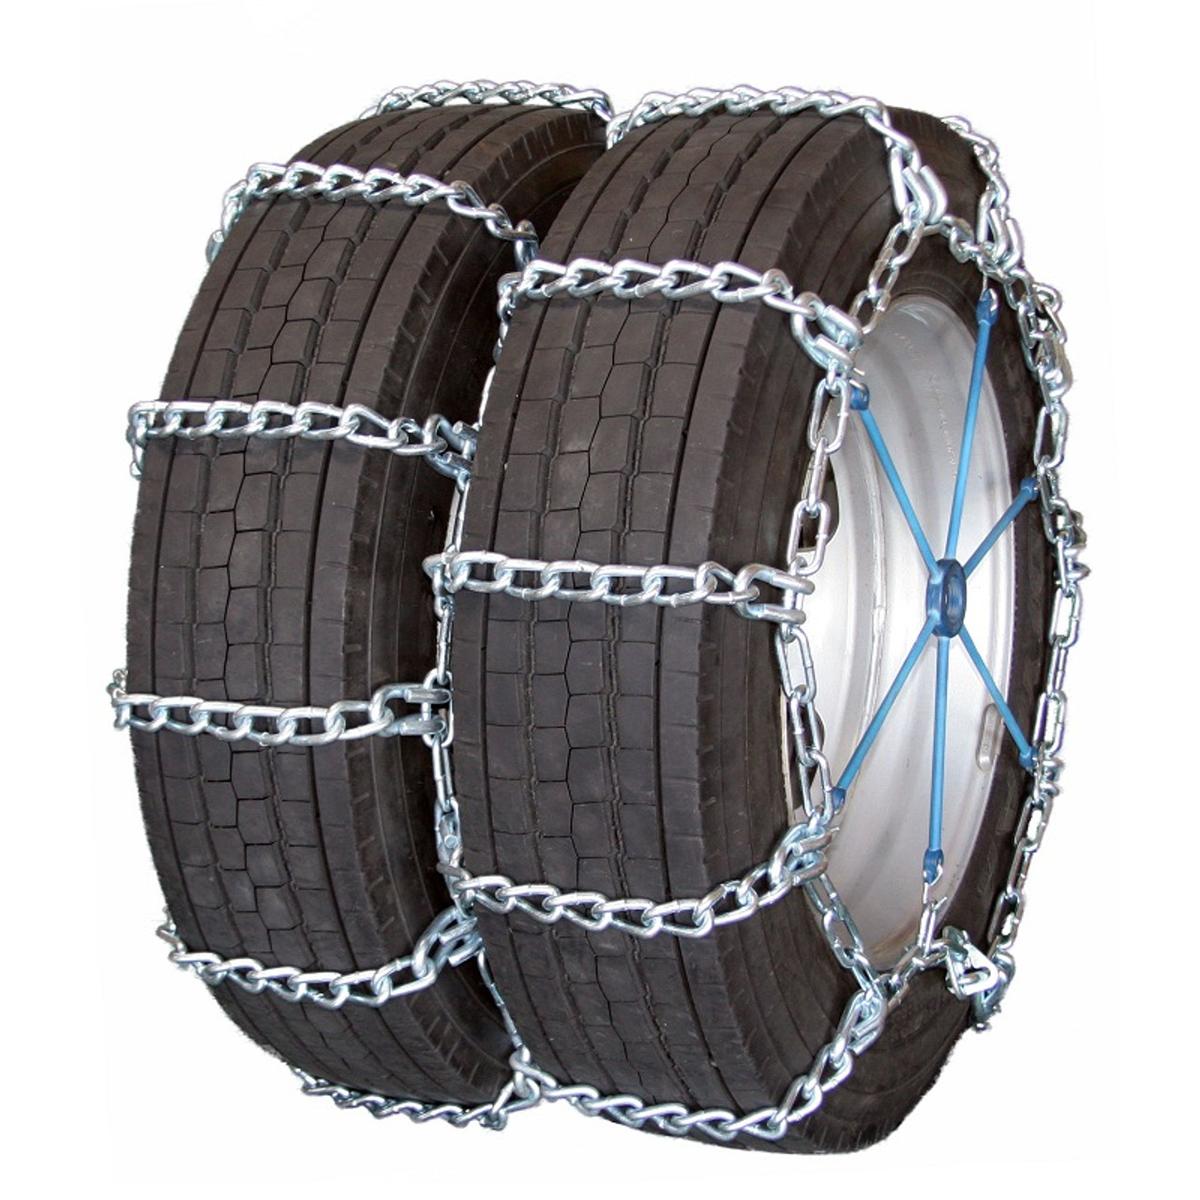 Mud Service Dual 245/70-22.5 Truck Tire Chains